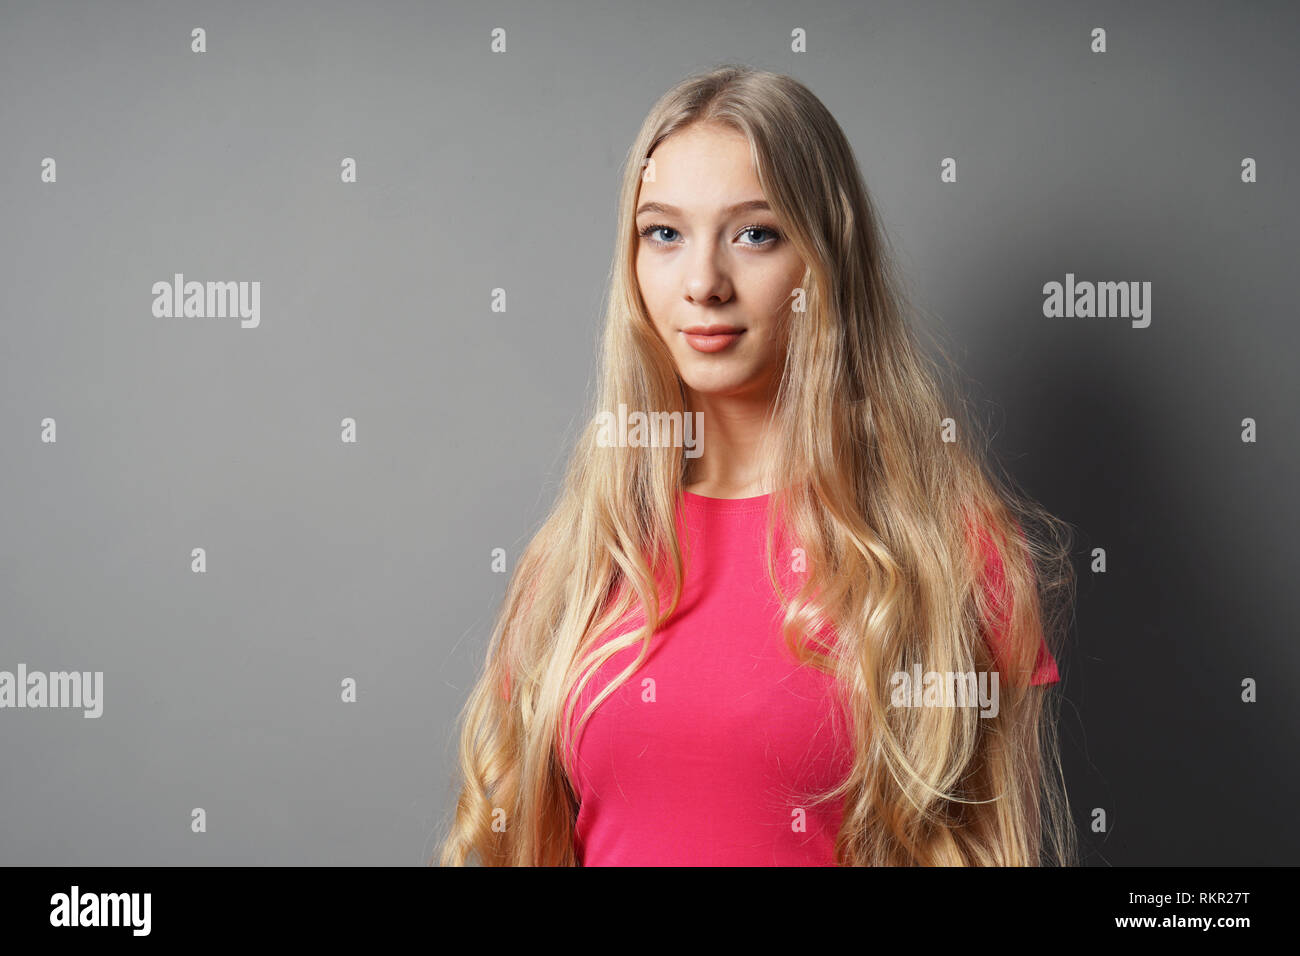 teenage woman with long blond hair and contented smile Stock Photo